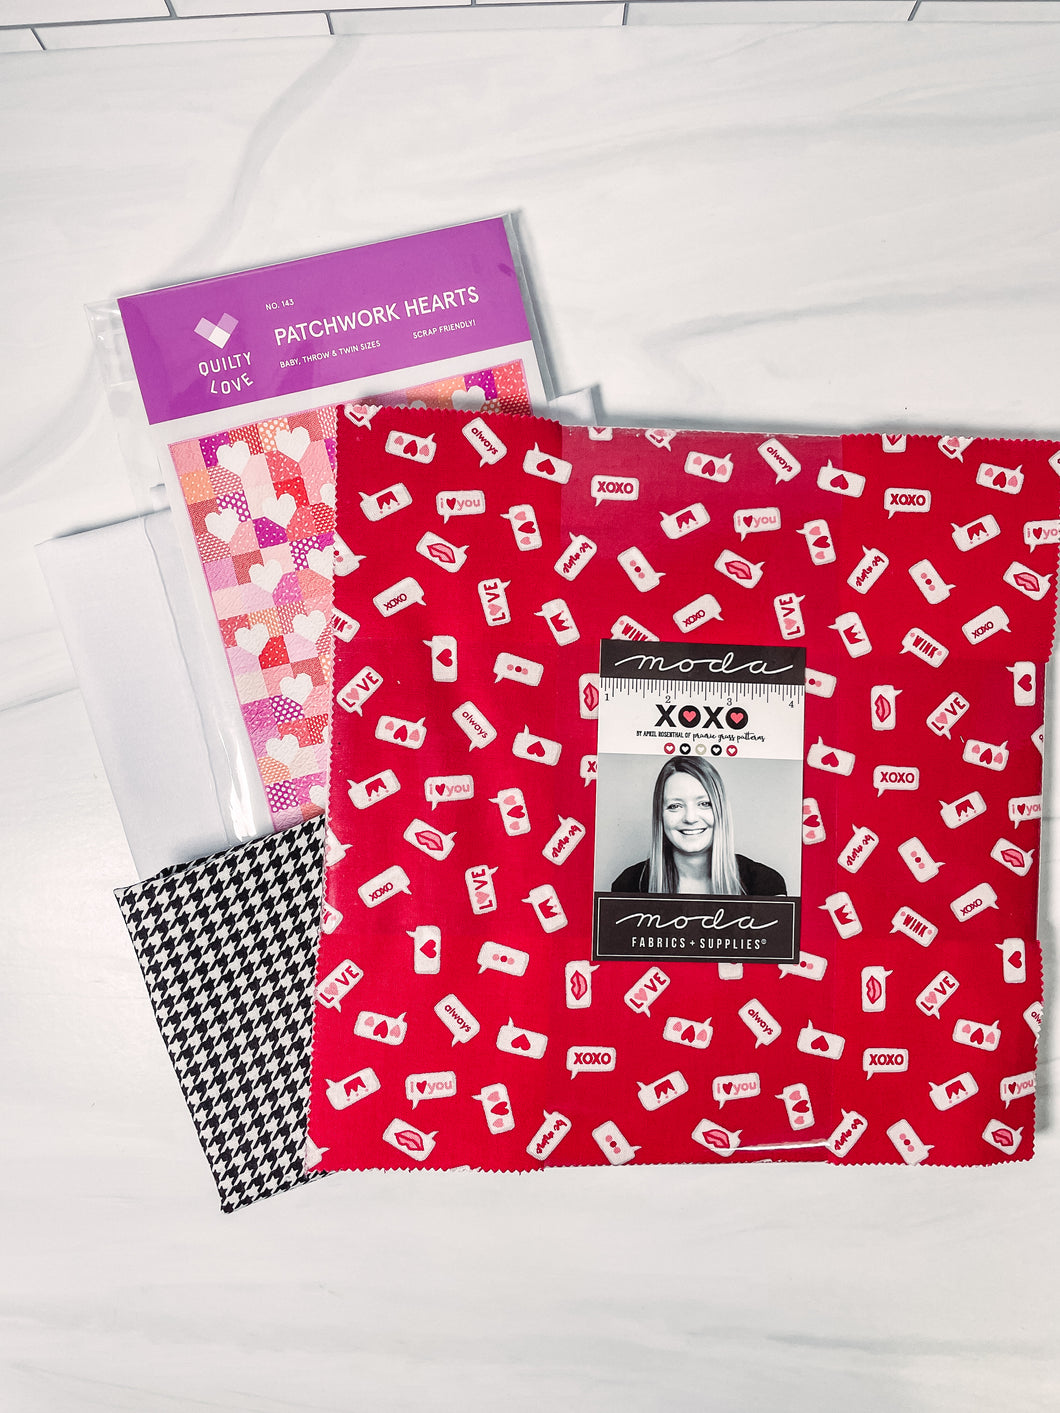 XOXO Patchwork Hearts Quilt Kit